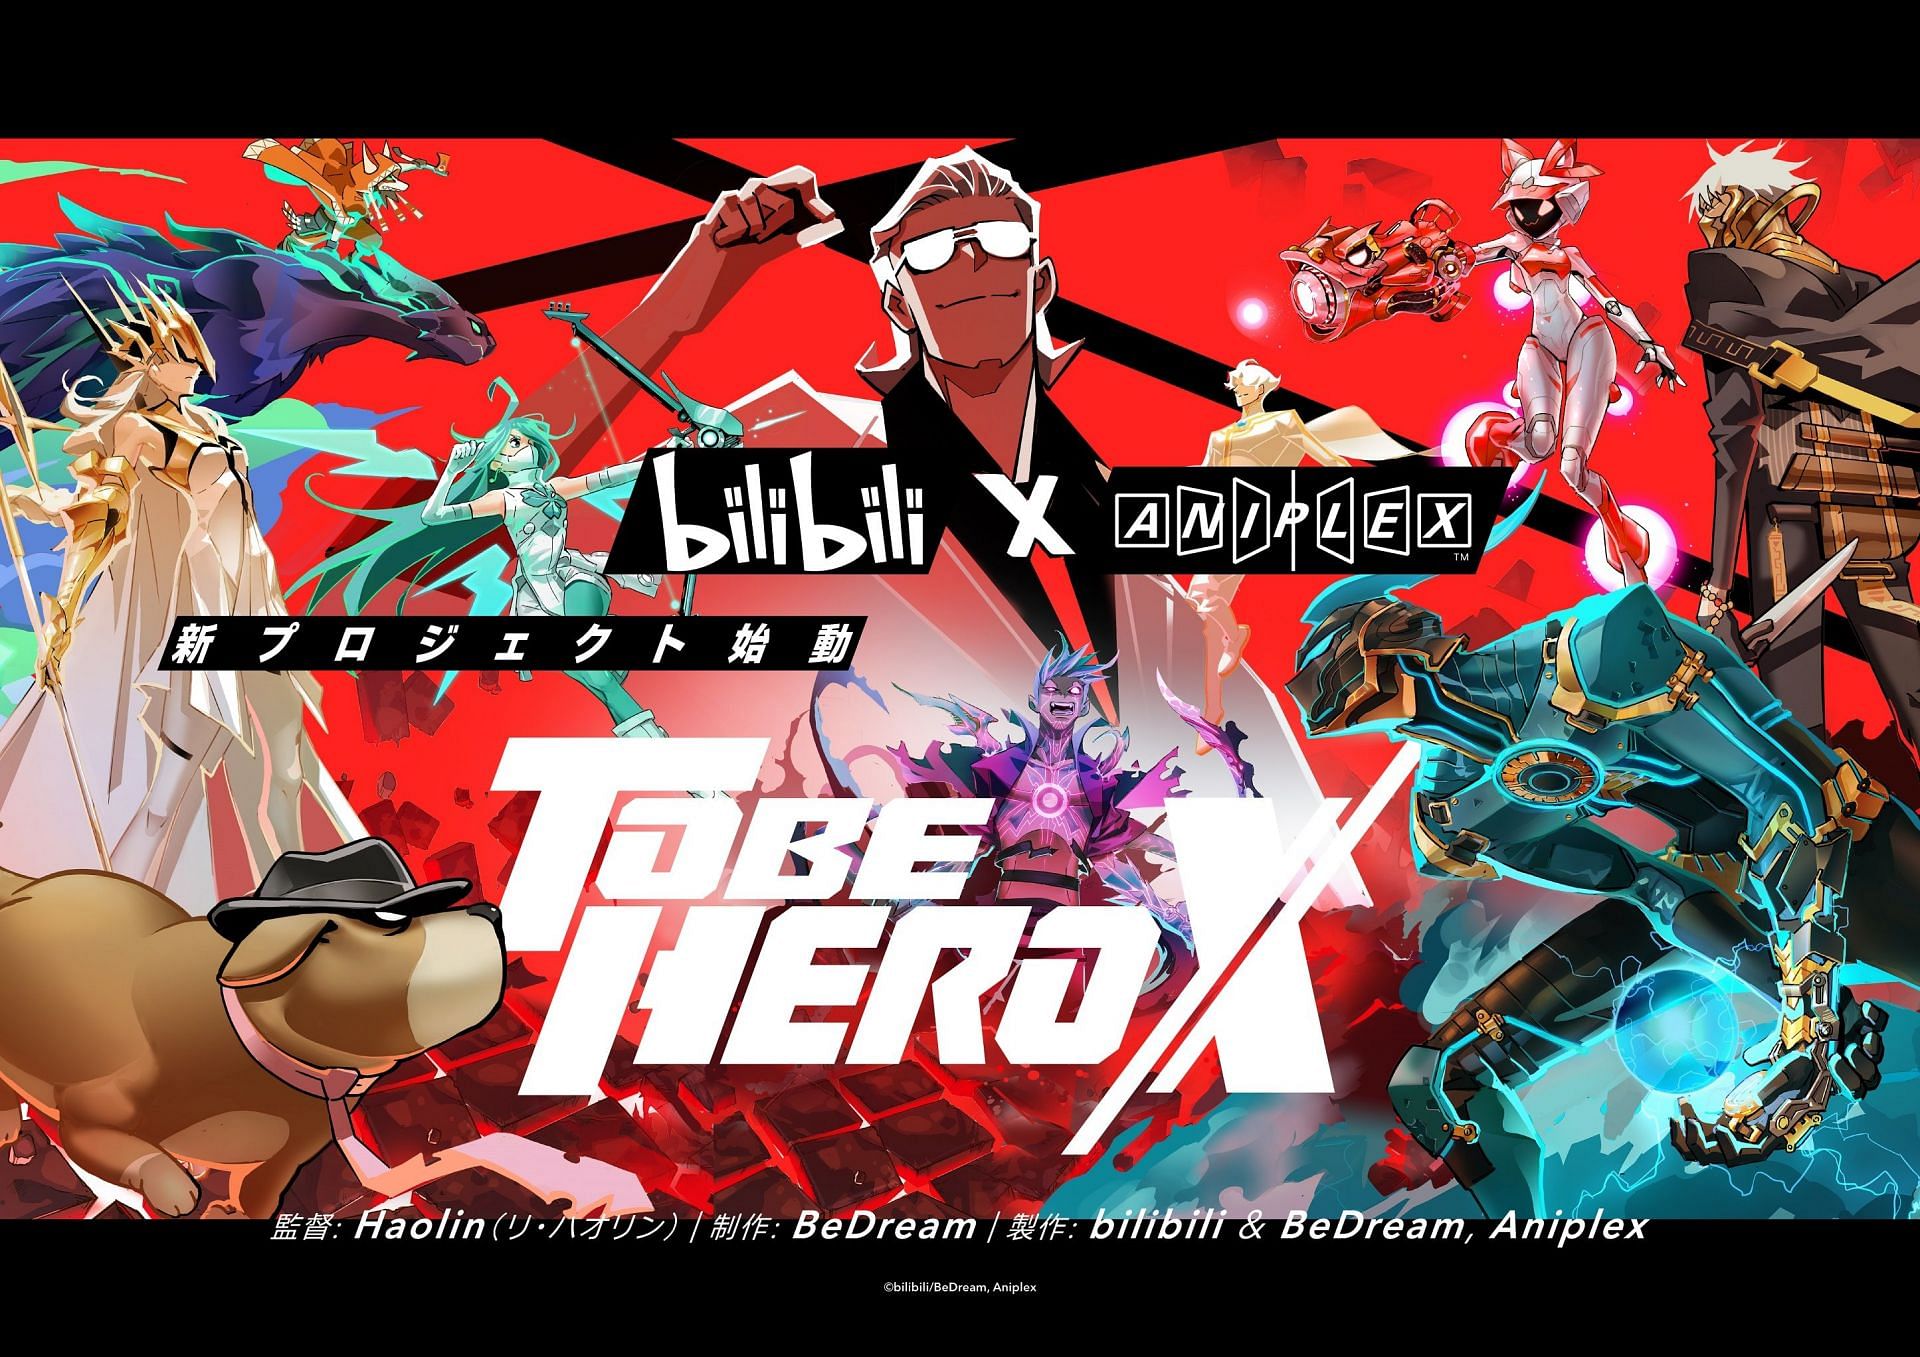 The official concept visual for To Be Hero X, released at Anime Japan 2023 event (Image via Emon/Studio LAN)